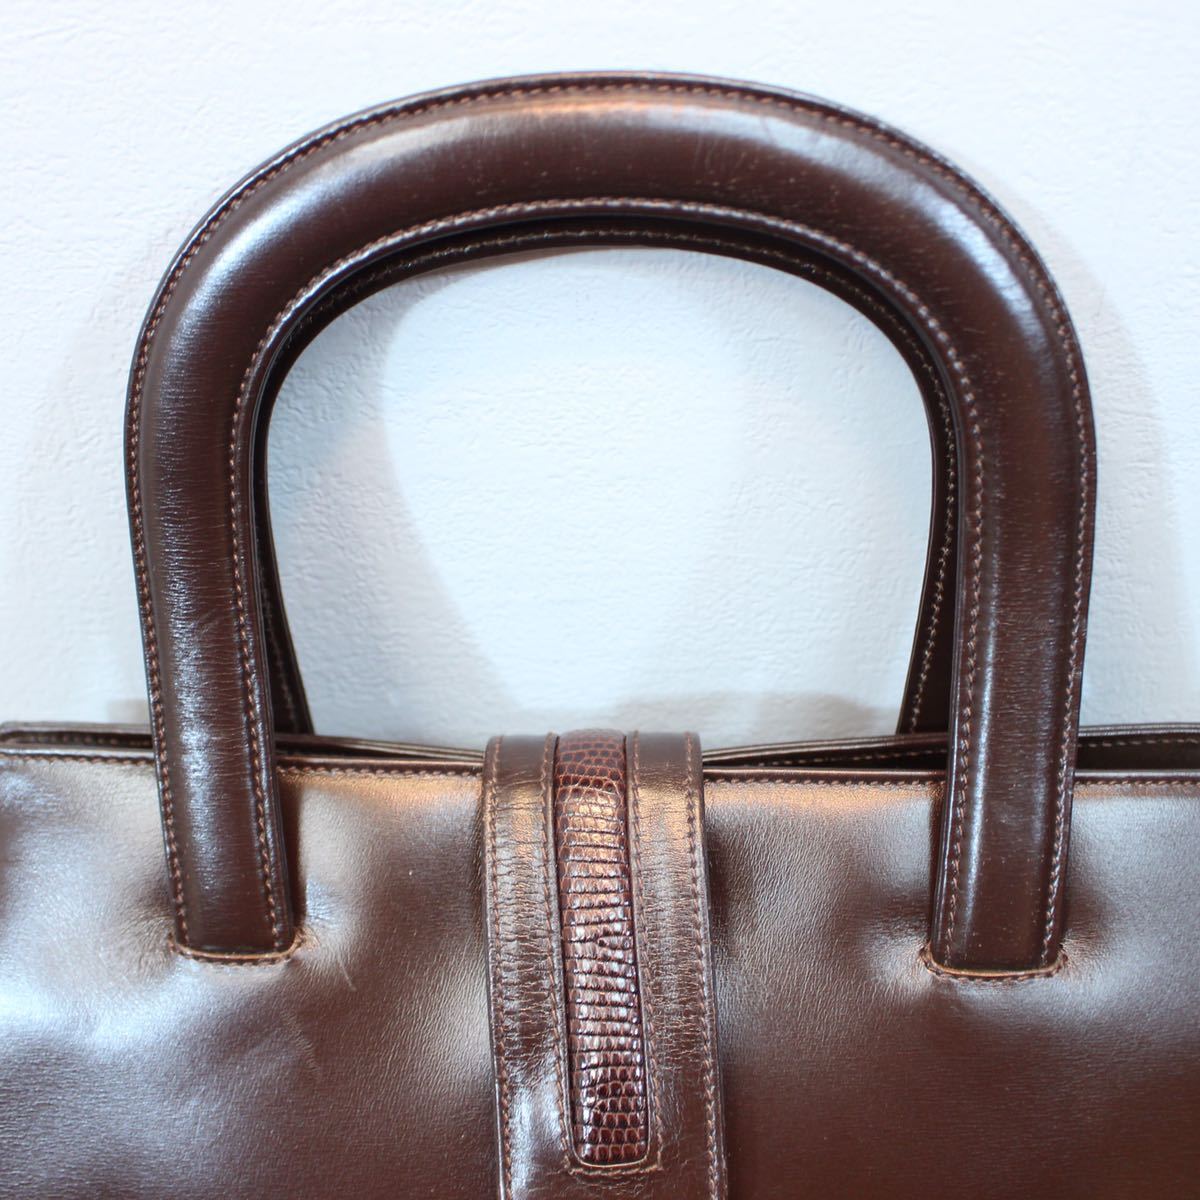 OLD GUCCI LEATHER HAND BAG MADE IN ITALY/オールドグッチレザーハンドバッグ_画像3